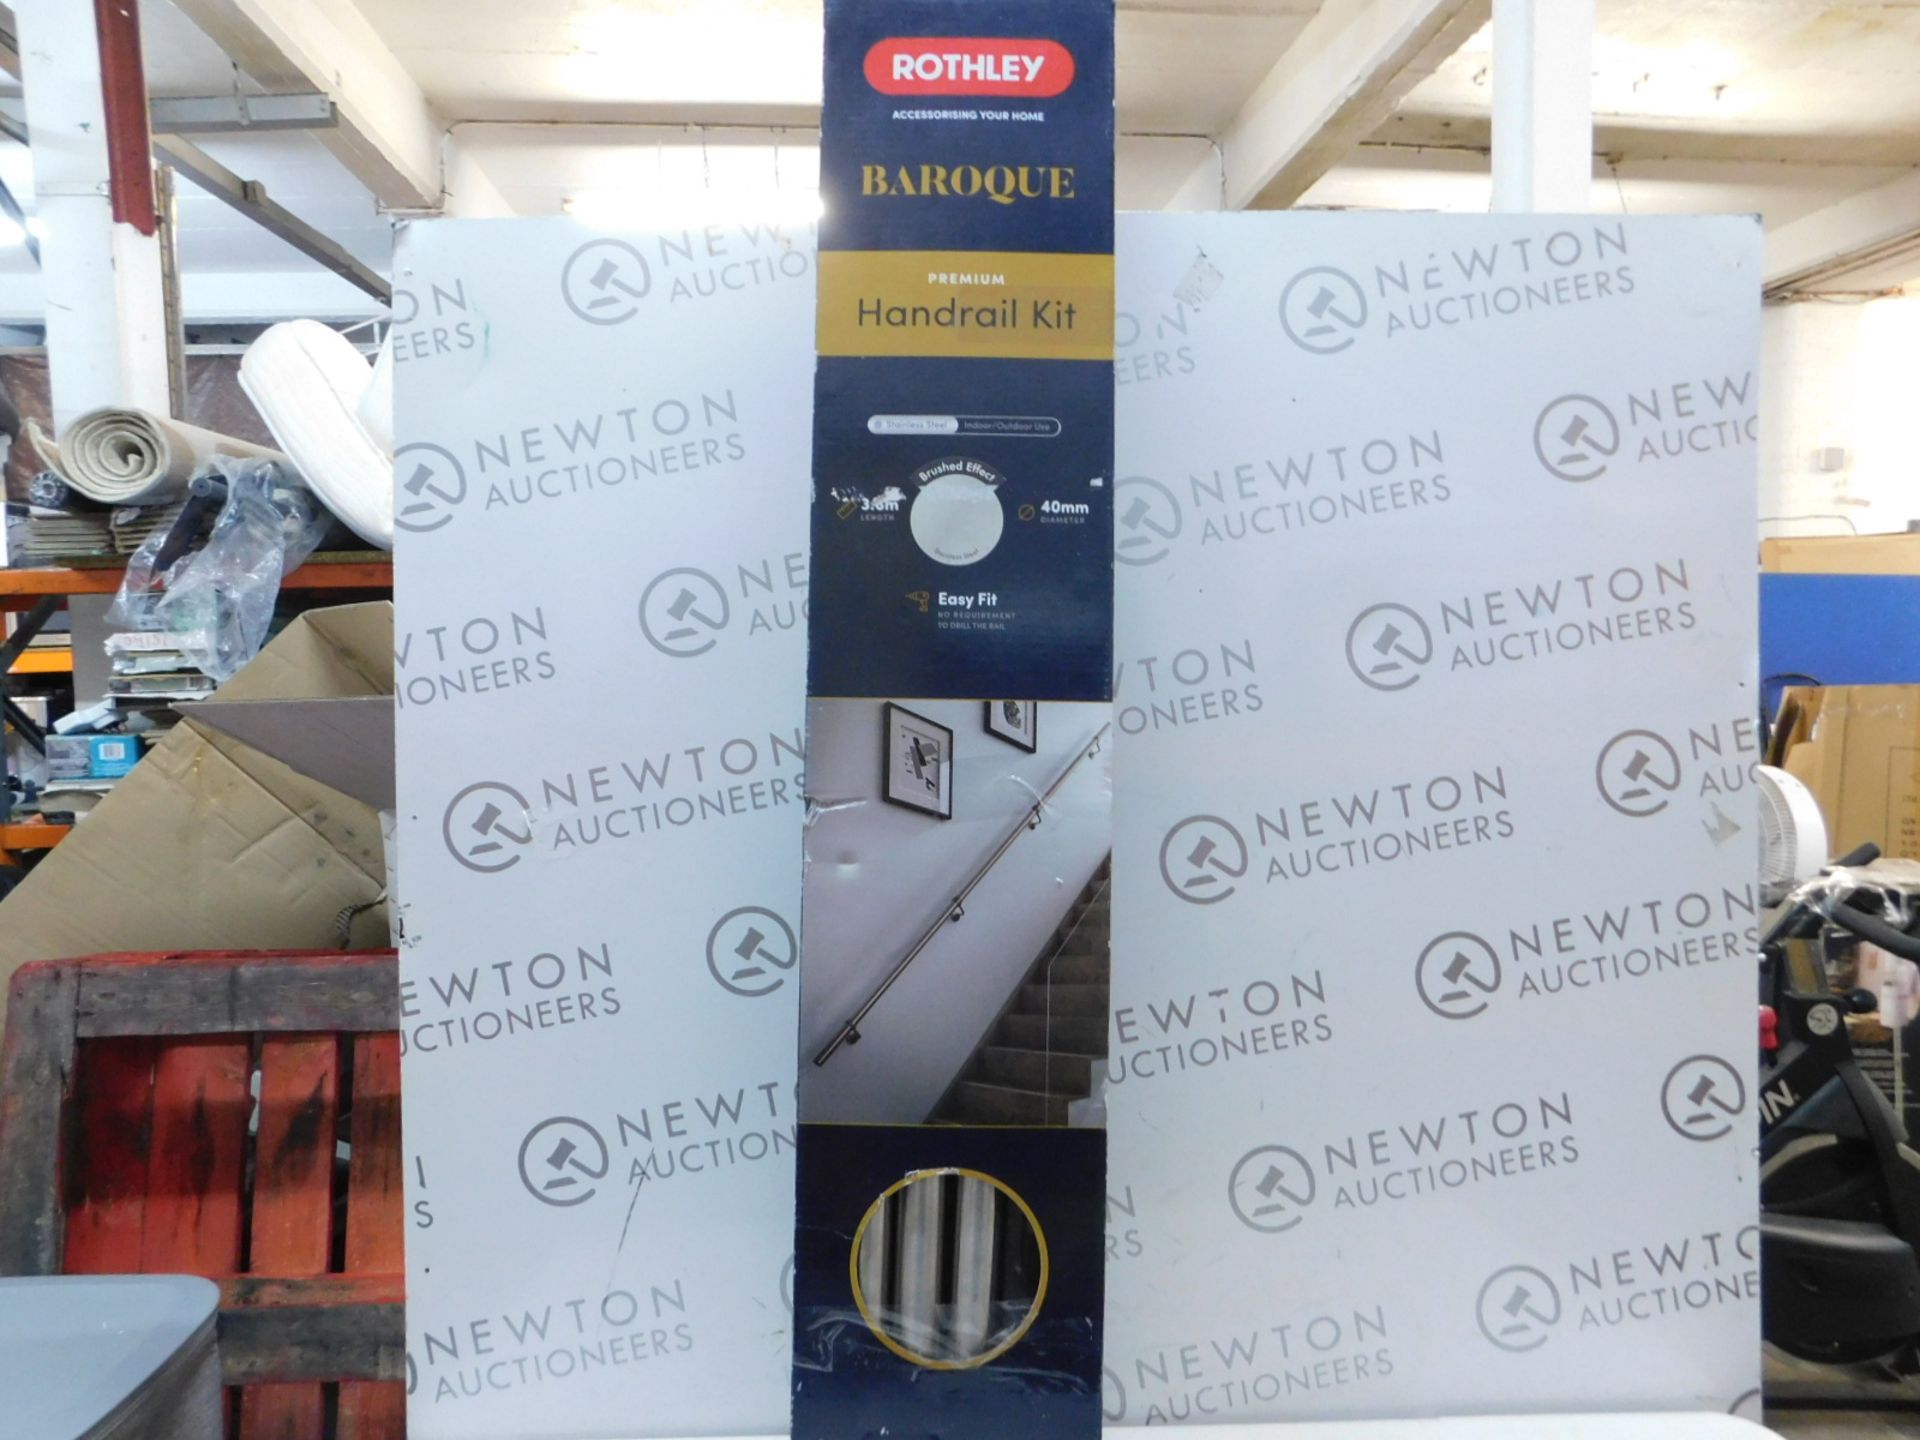 1 BOXED ROTHLEY BRUSHED STAINLESS STEEL HANDRAIL KIT 3.6M RRP Â£149